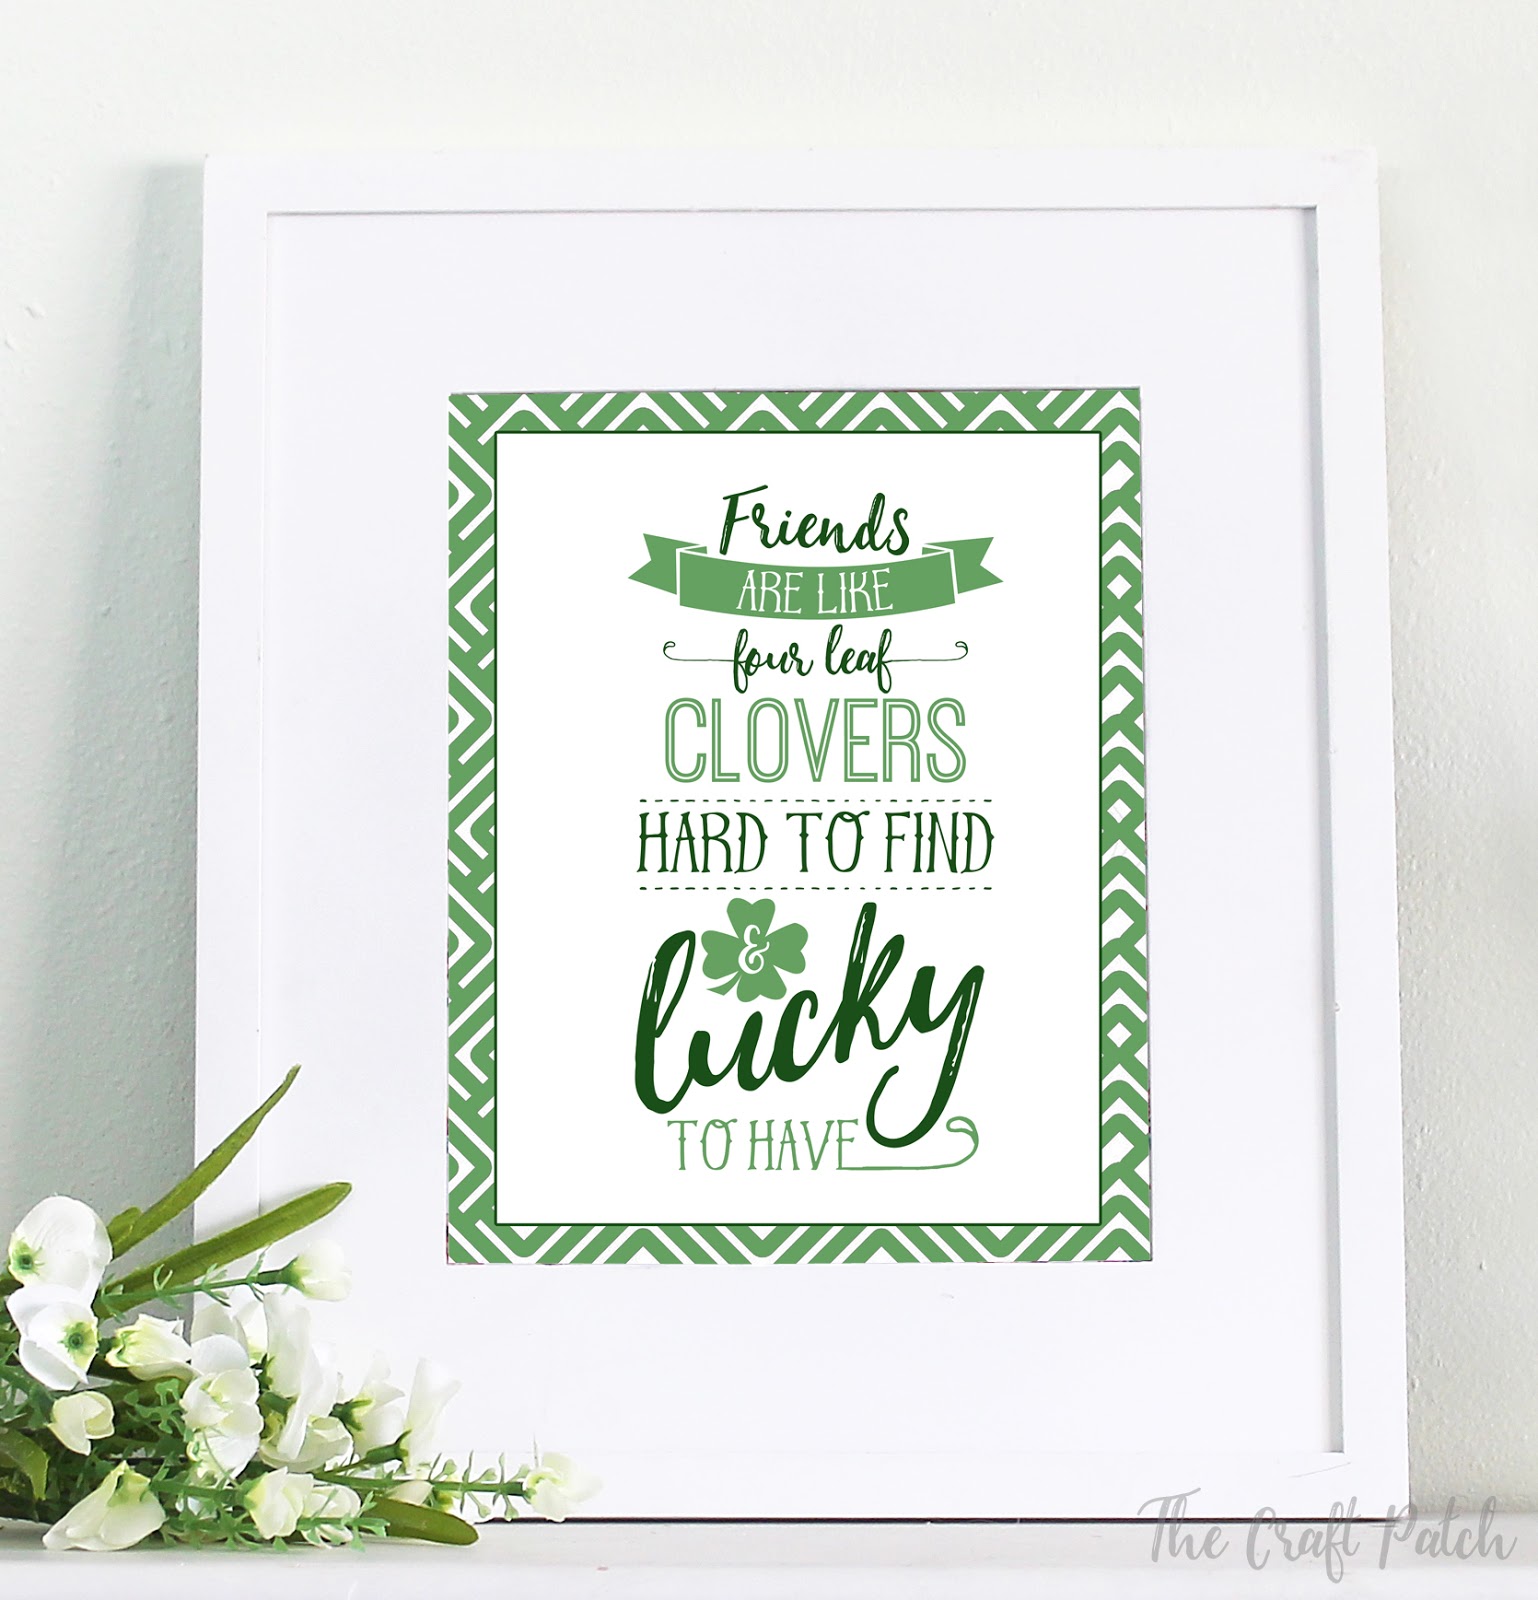 15 Cute Spring Free Printables- These spring wall art prints are an easy (and inexpensive) way to get your home ready for spring! | spring decor, spring art prints, Easter decor, Easter art prints, #freePrintables #wallArt #spring #decor #ACultivatedNest